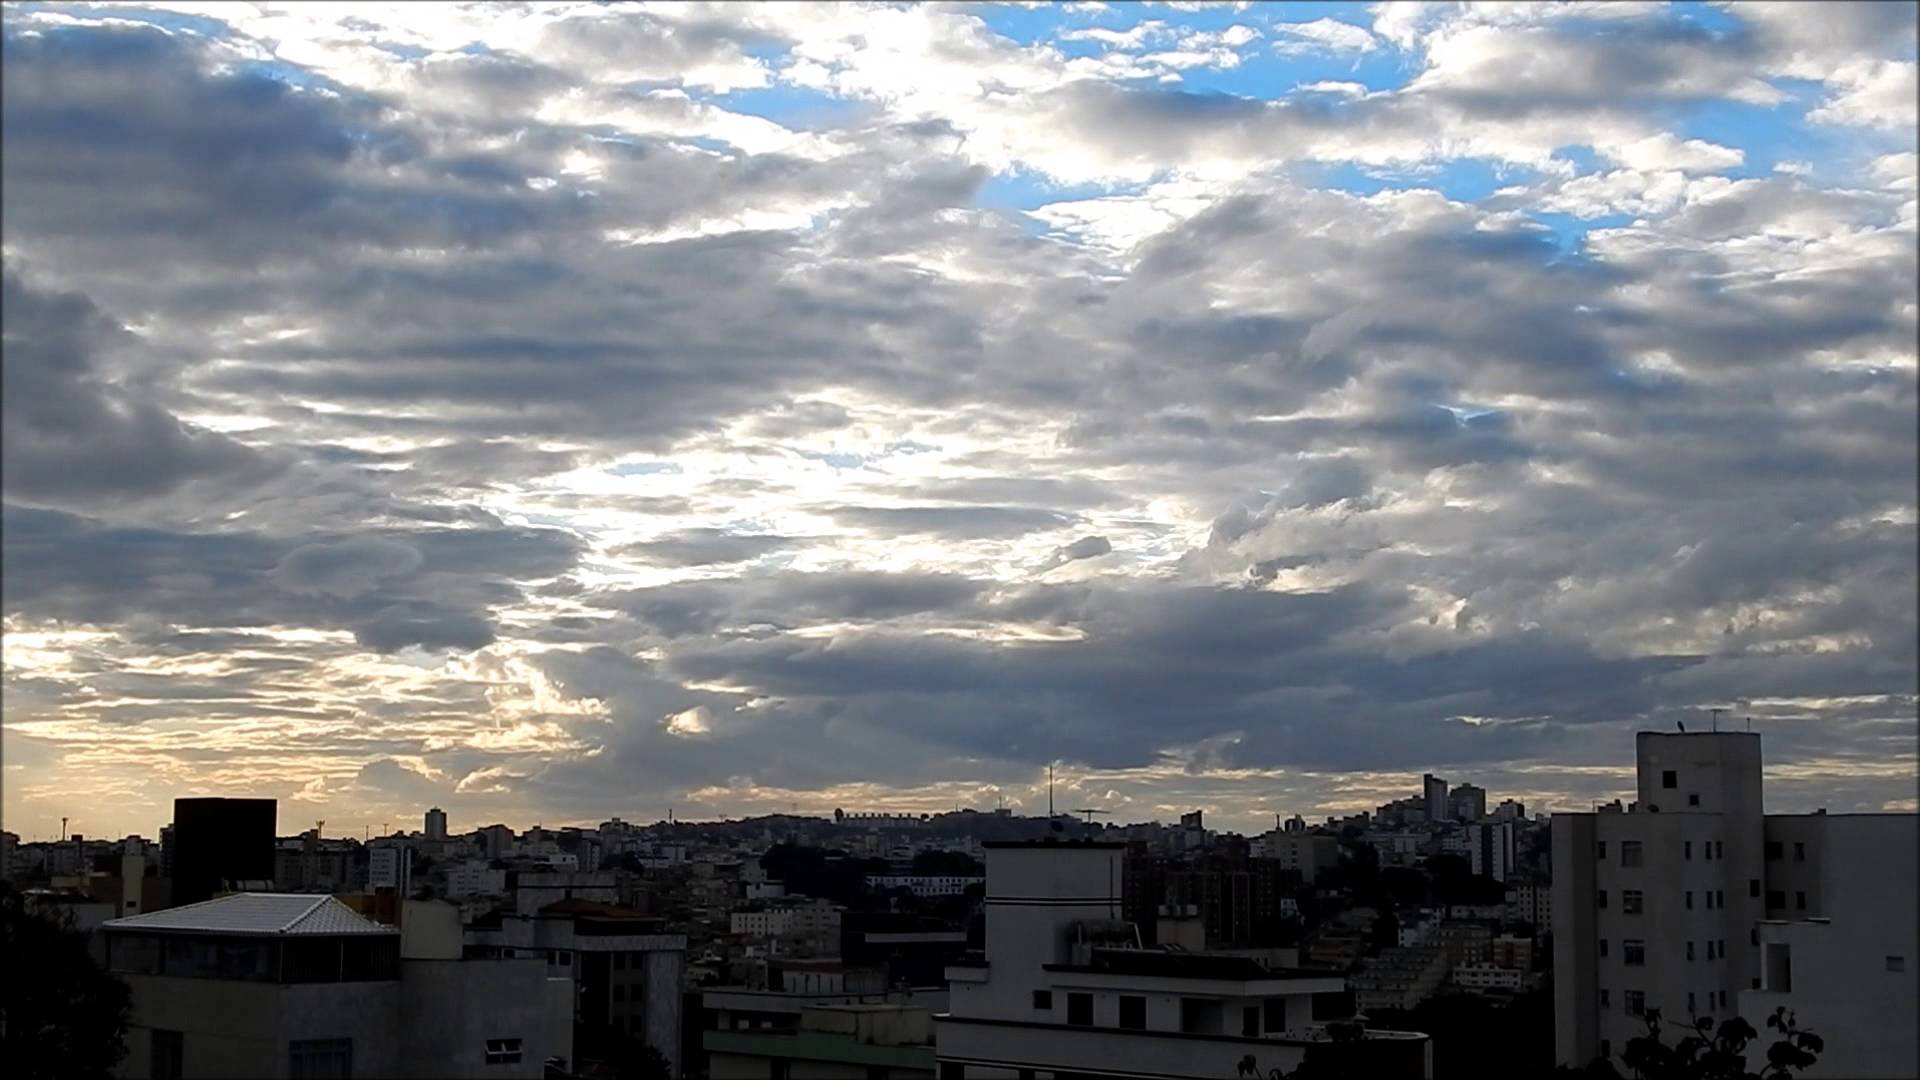 The End of a Cloudy Winter Day in Belo Horizonte City! - YouTube